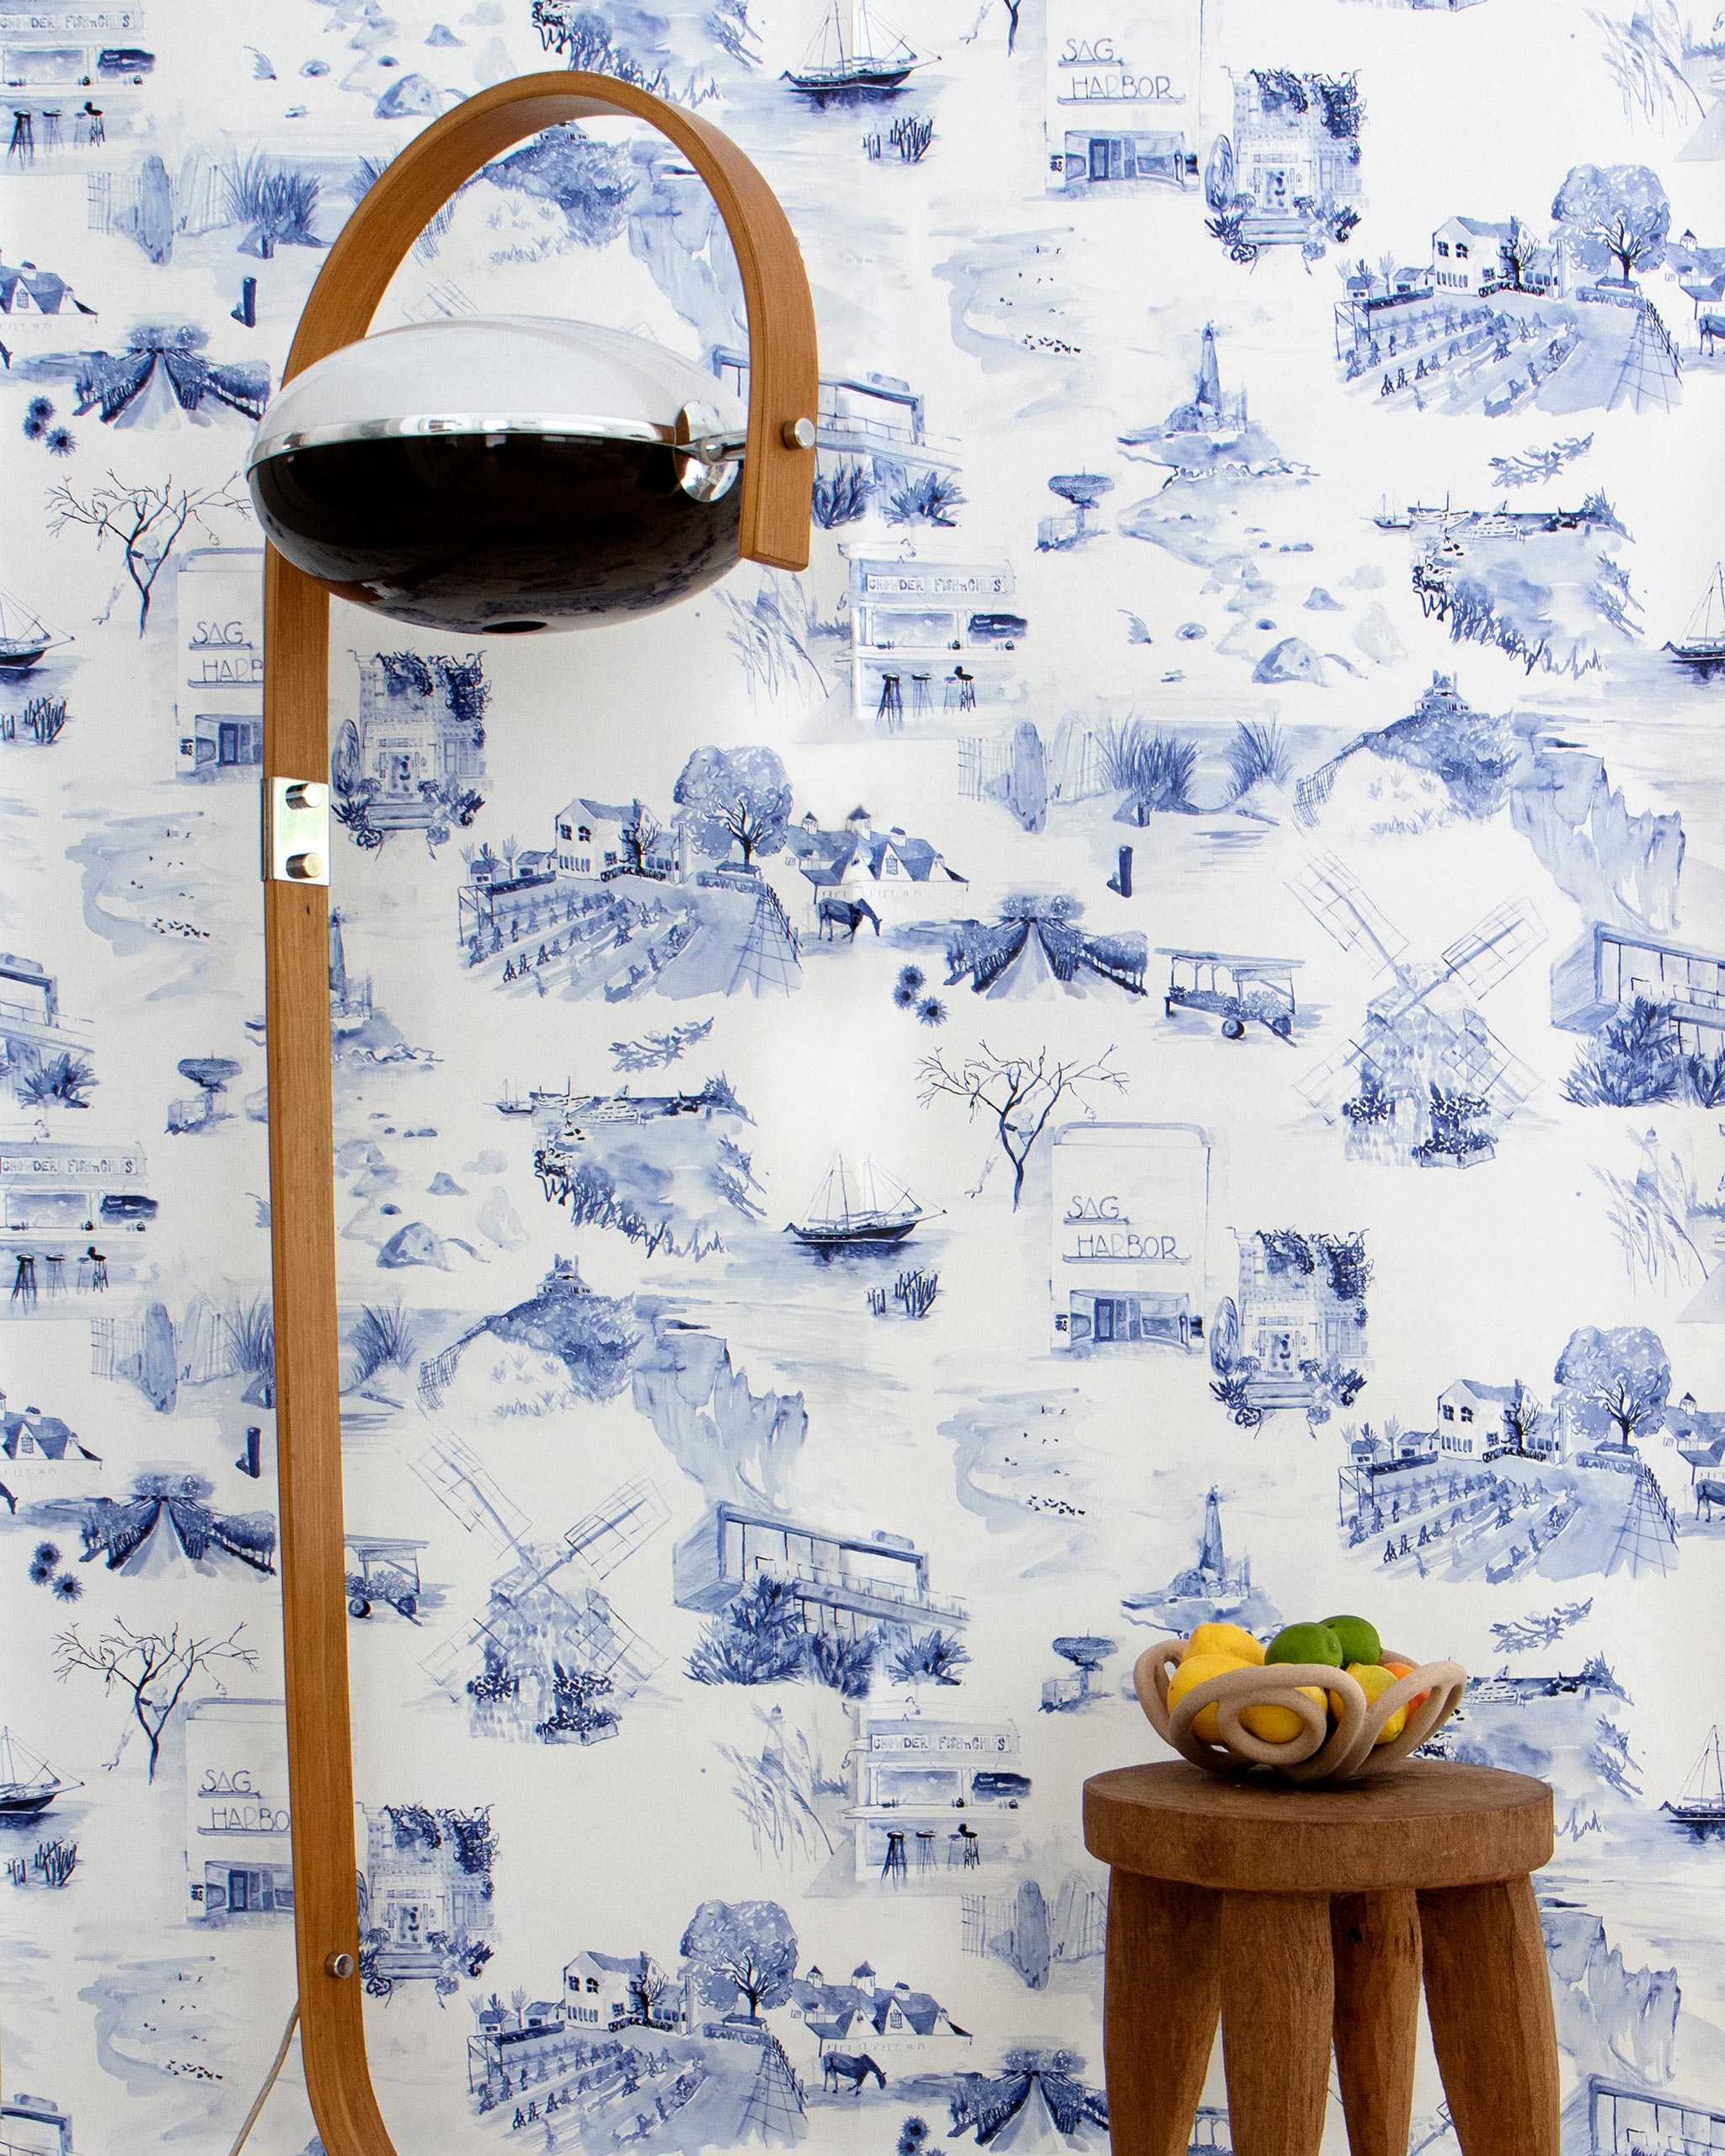 A lamp and end table stand in front of a wall papered in a playful illustrated city print in navy, blue and white.